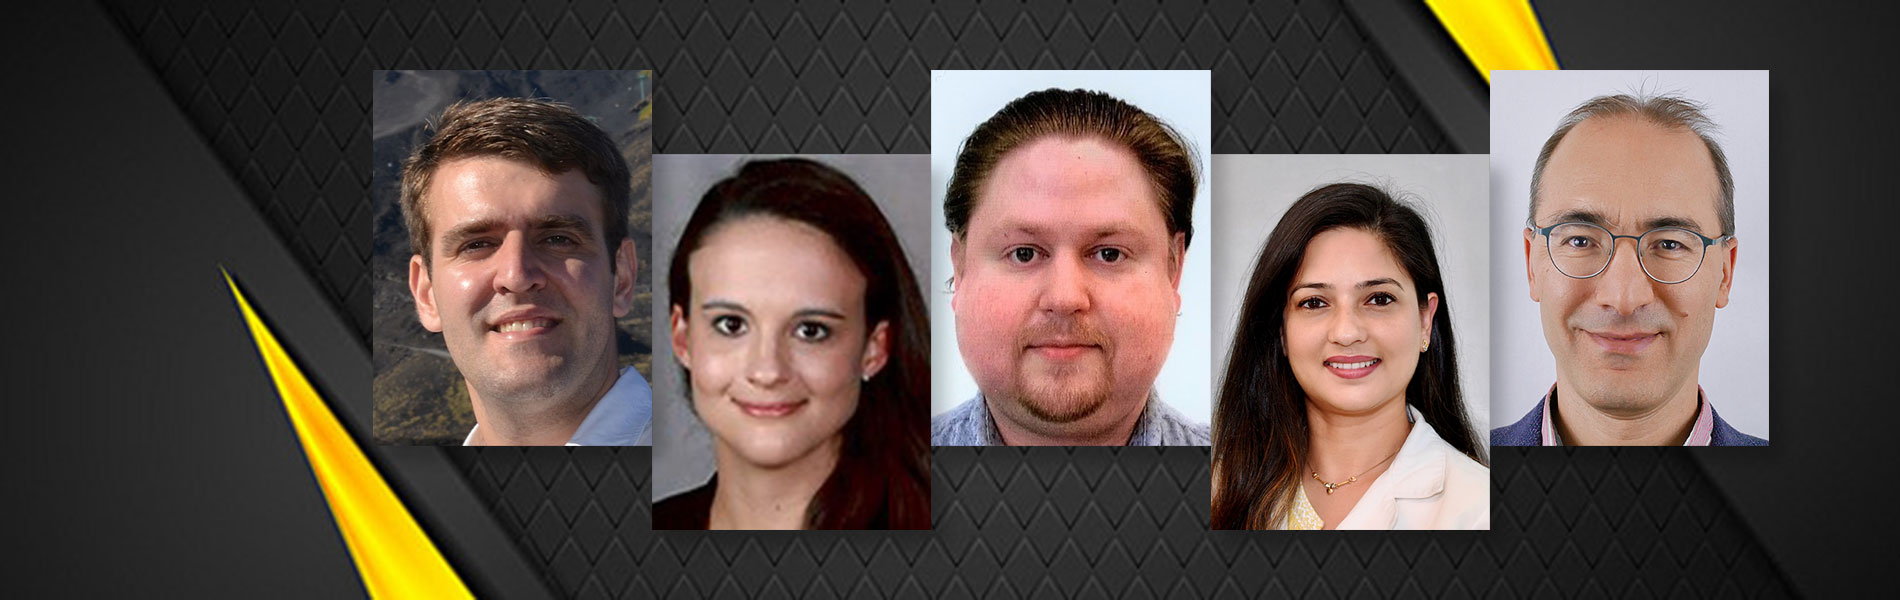 Pathology Welcomes New Faculty: Drs. Thayyil, Eschbacher, Lopes, Kanotra, Ranguelov, and Griffin